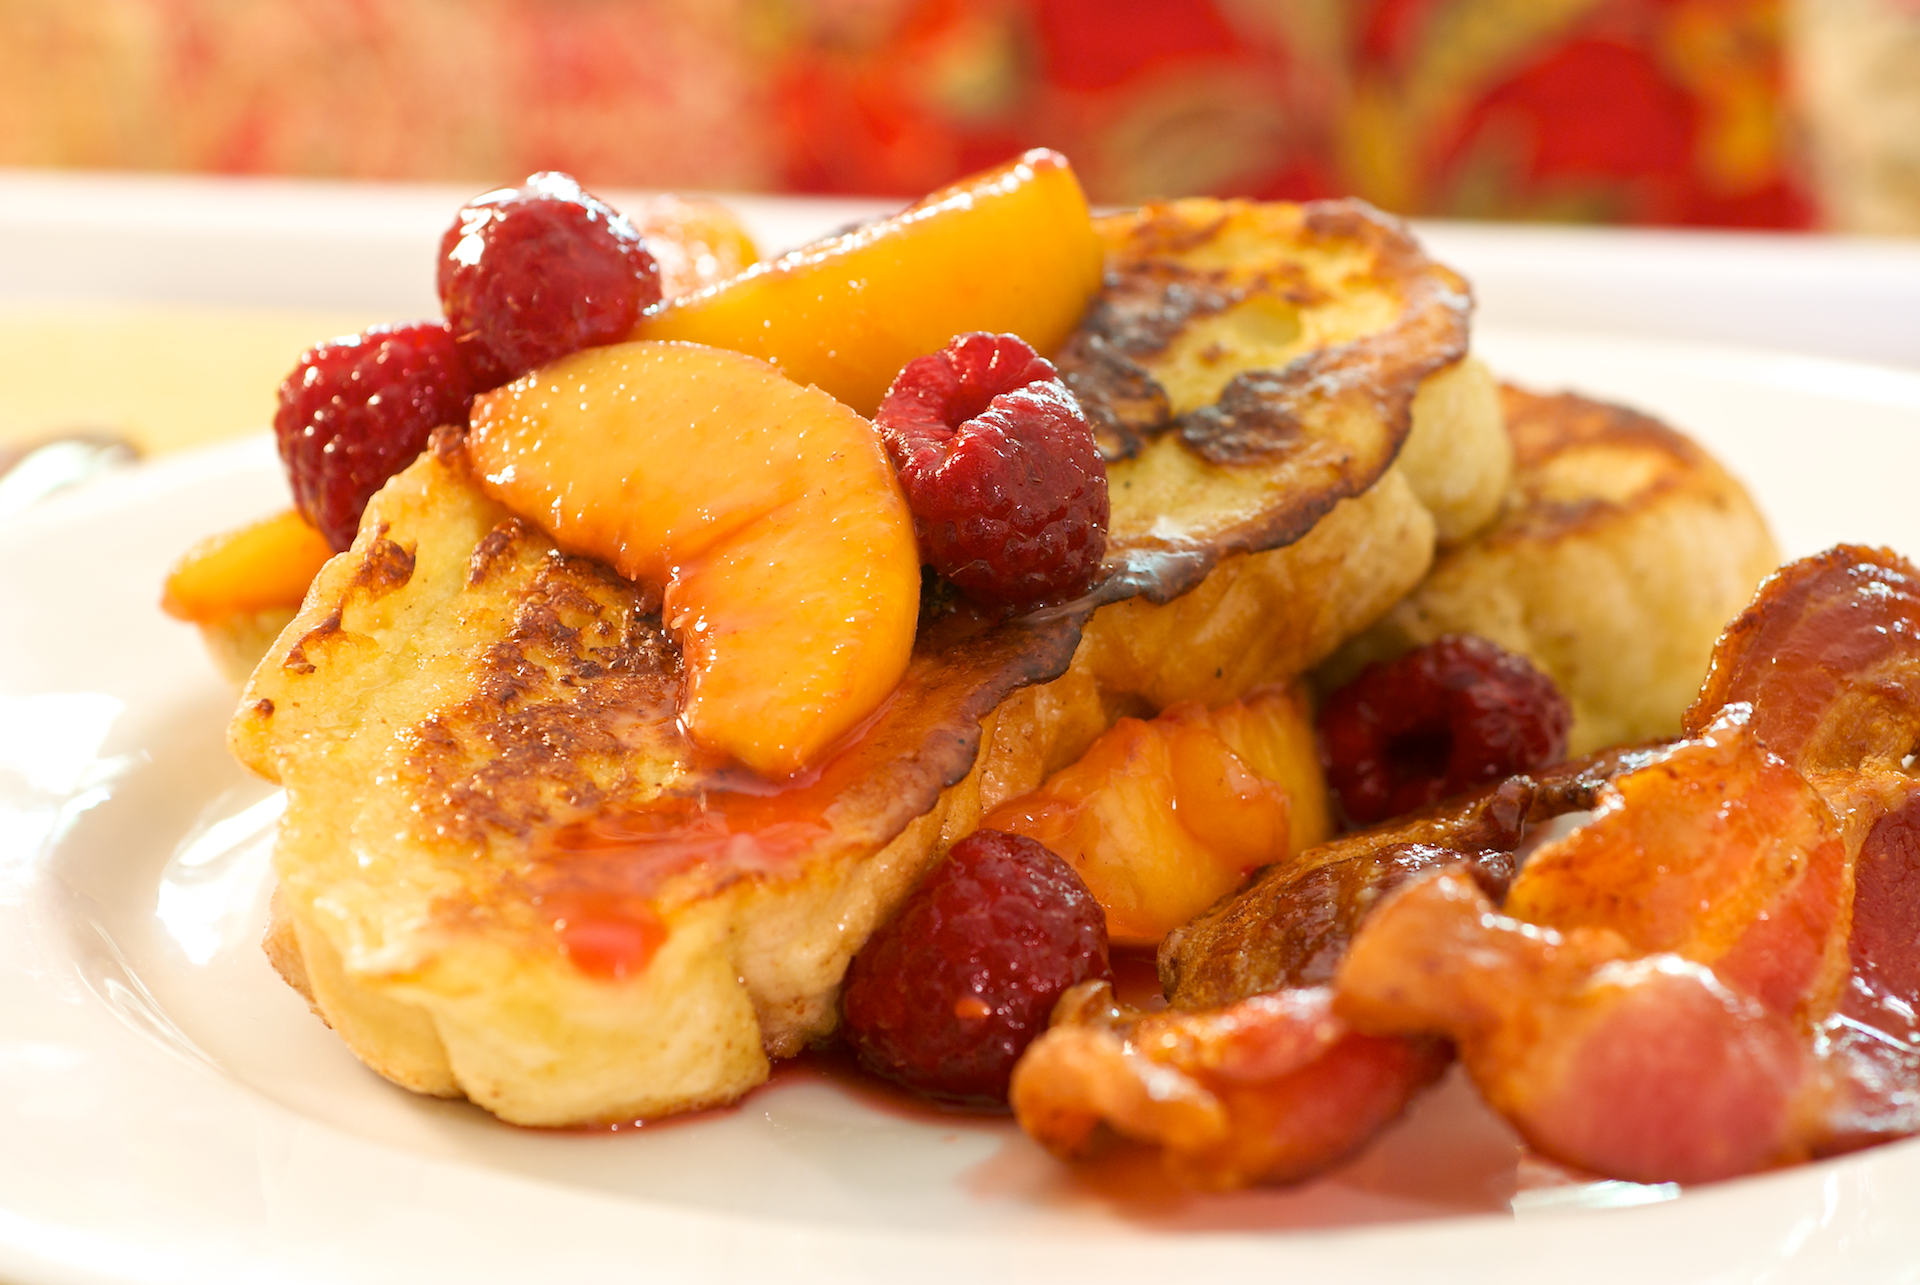 Peaches and raspberries are the perfect addition to the light sweetness to buttery French toast that’s great with a side of crispy bacon or sizzling sausage.